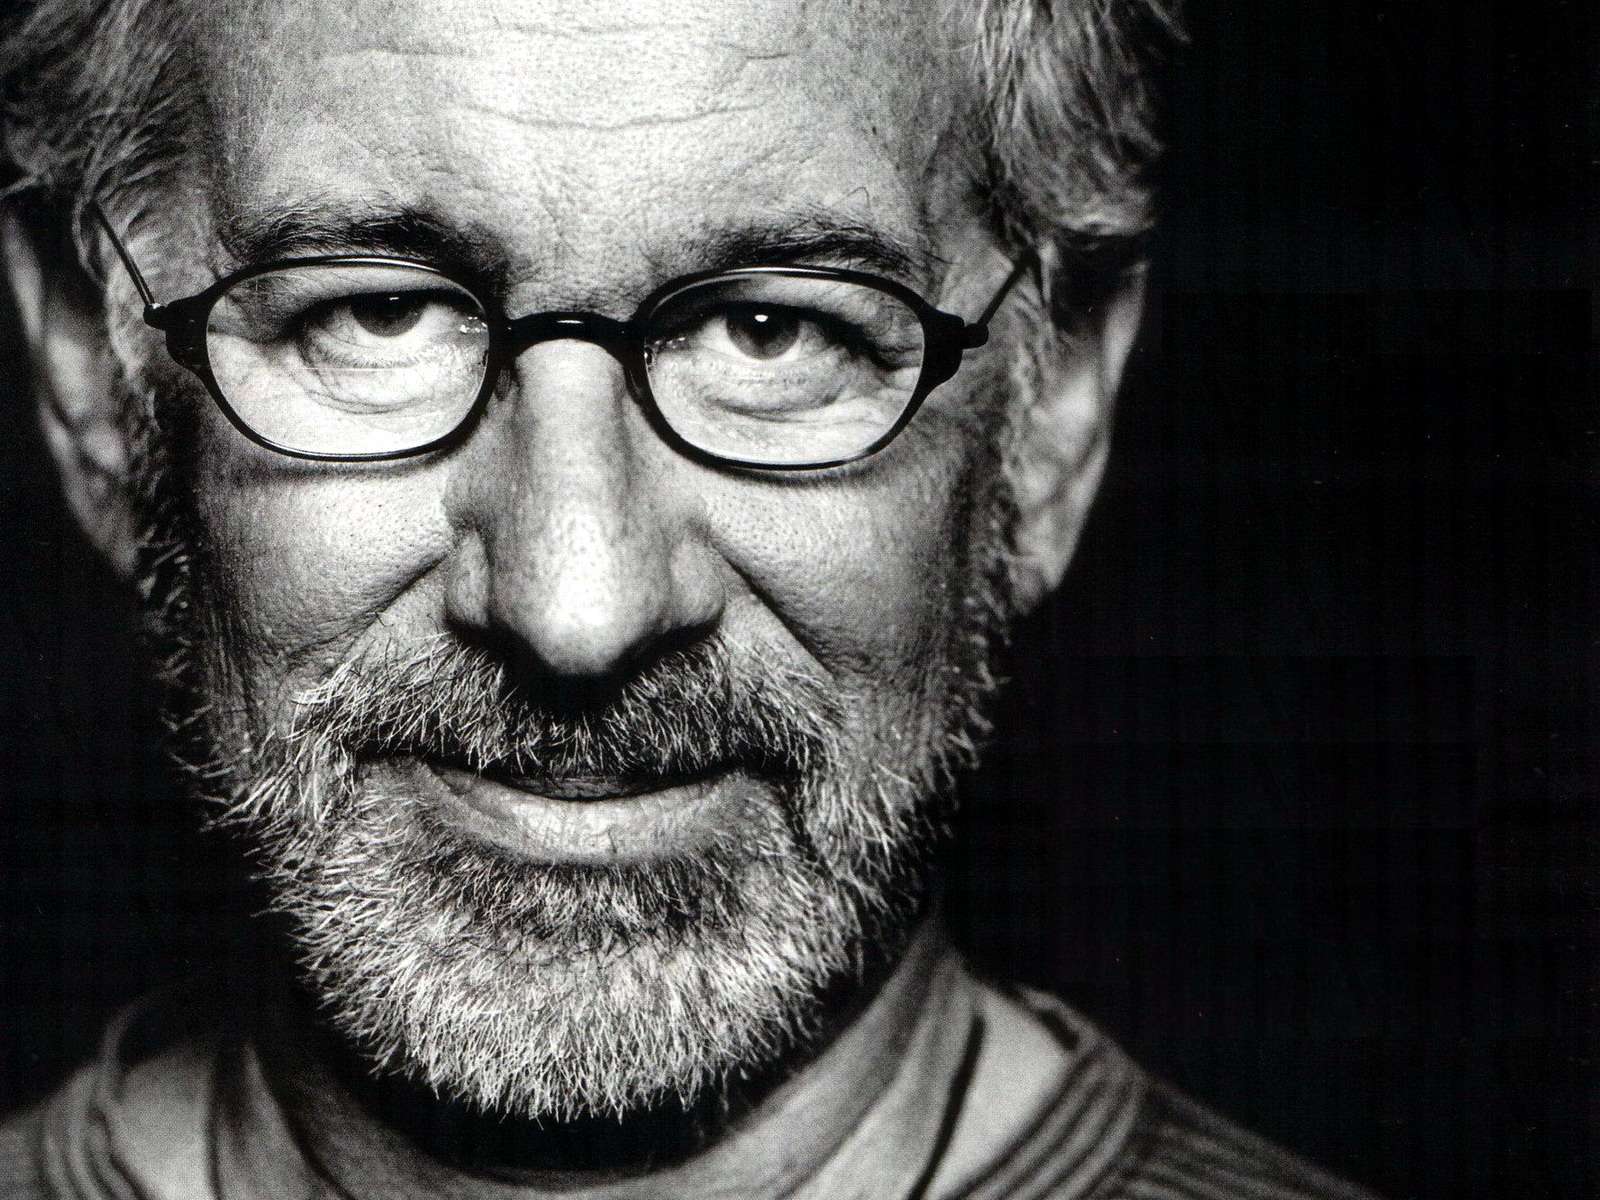 Did Steven Spielberg Say the GOP is Just Like the Slave Holding South?